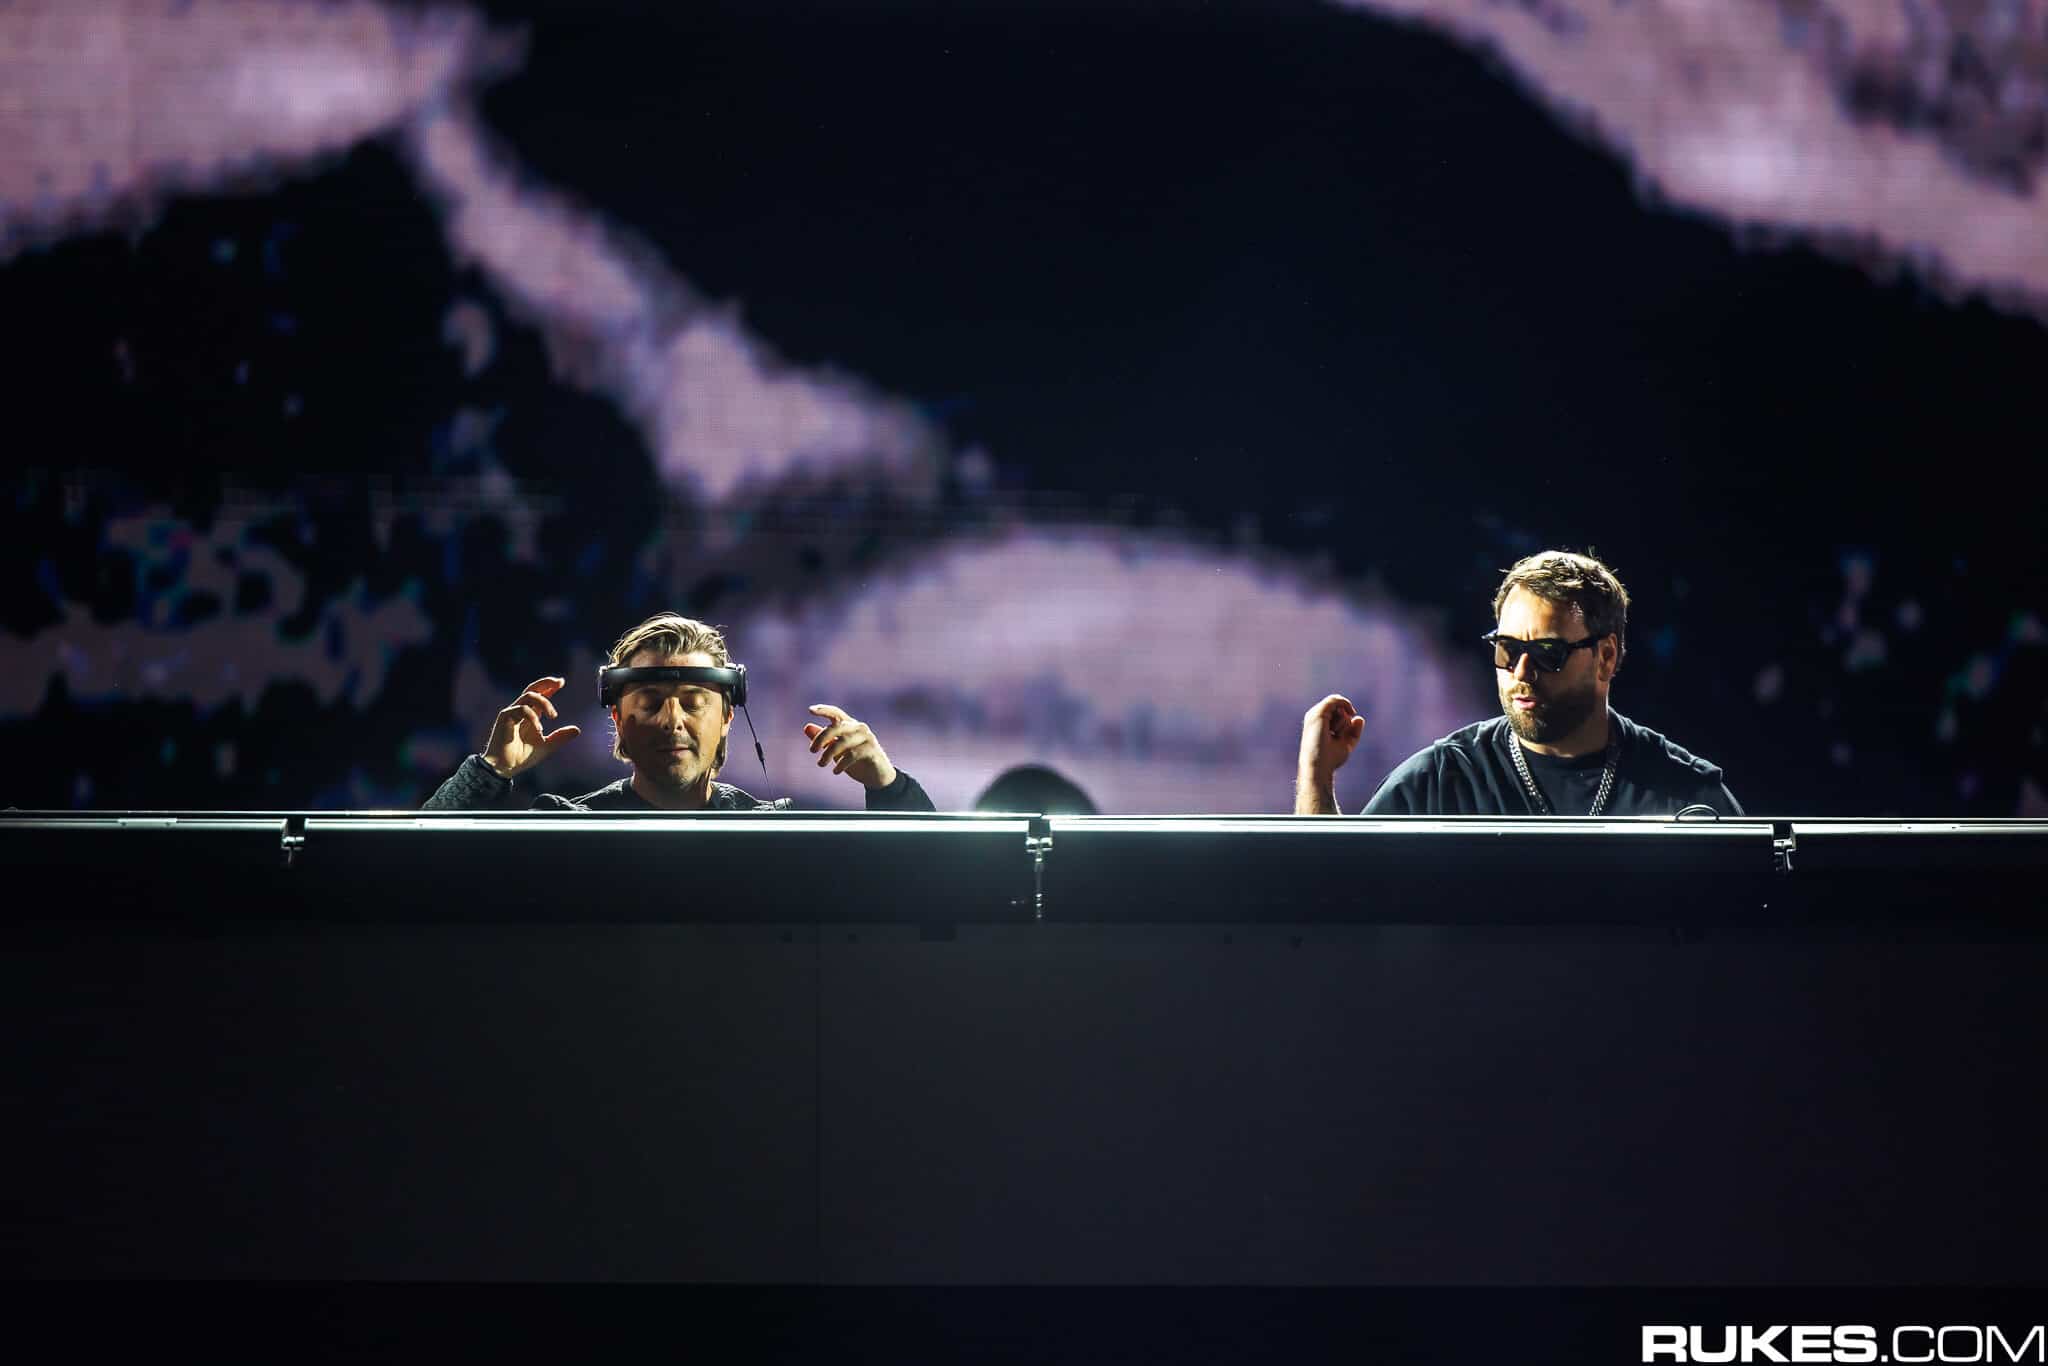 Axwell Λ Ingrosso anthem ‘Thinking About You’ turns 4 years old